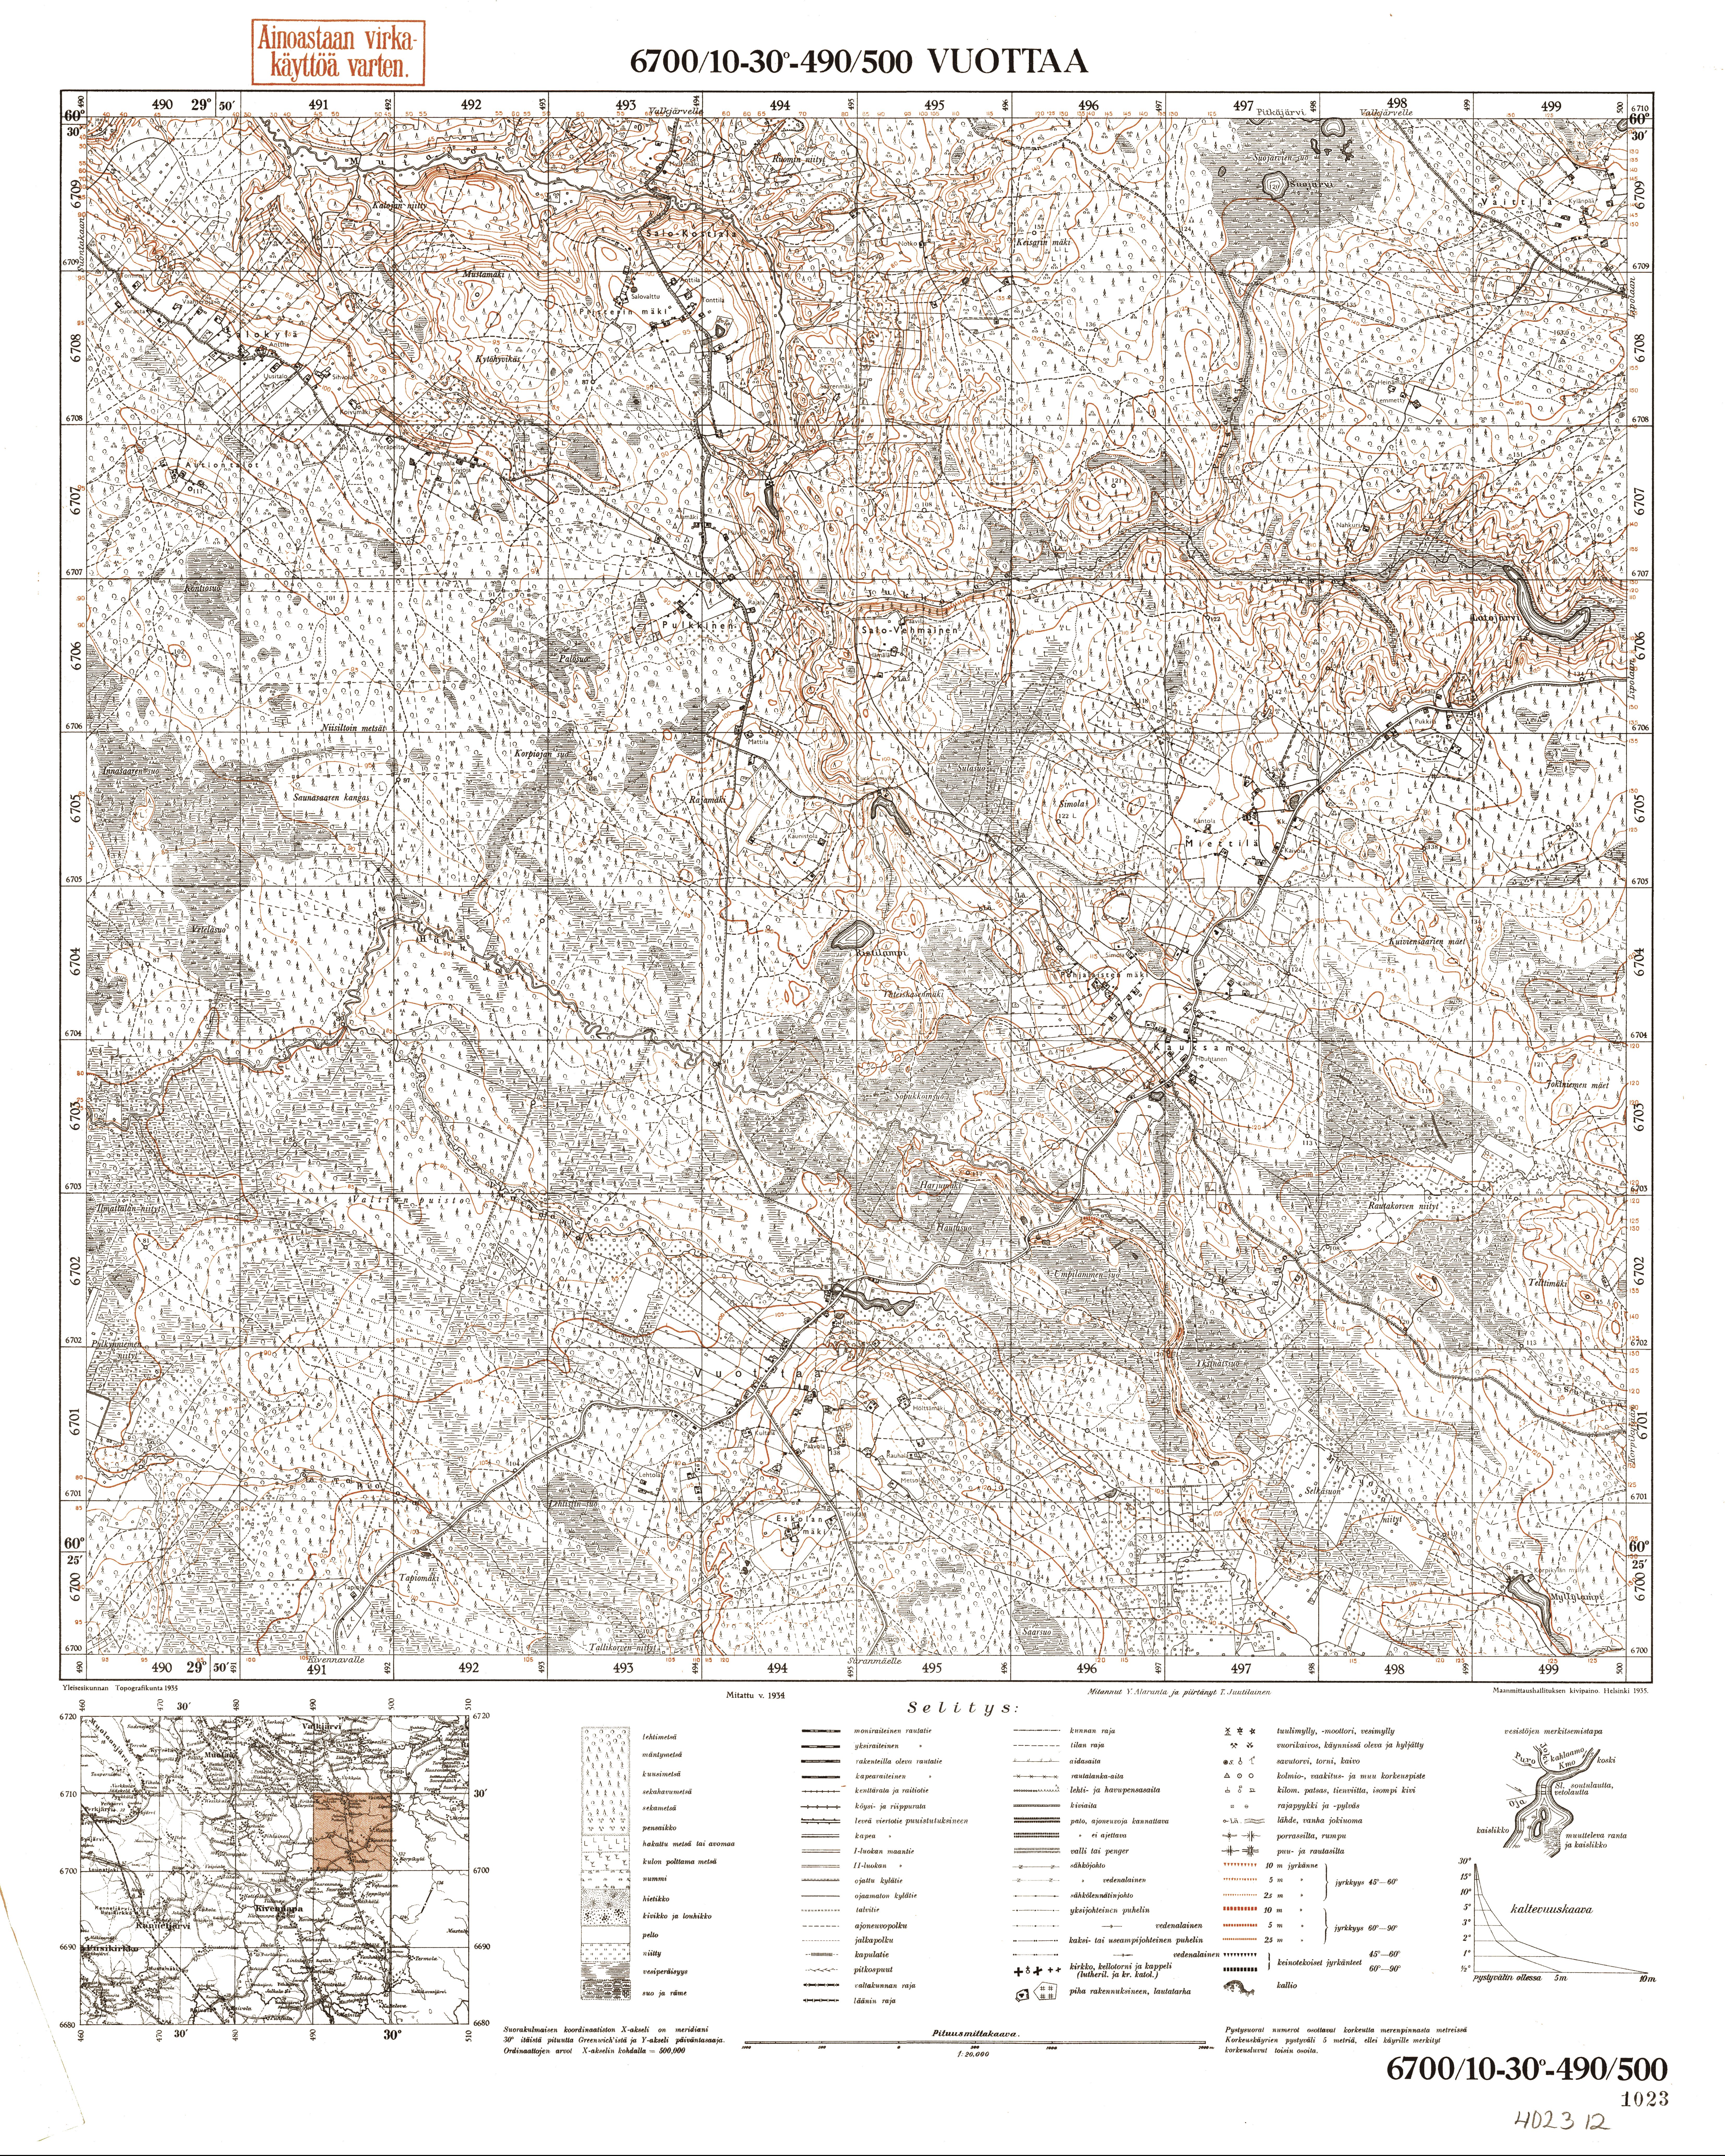 Kirovskoje. Vuottaa. Topografikartta 402312. Topographic map from 1937. Use the zooming tool to explore in higher level of detail. Obtain as a quality print or high resolution image